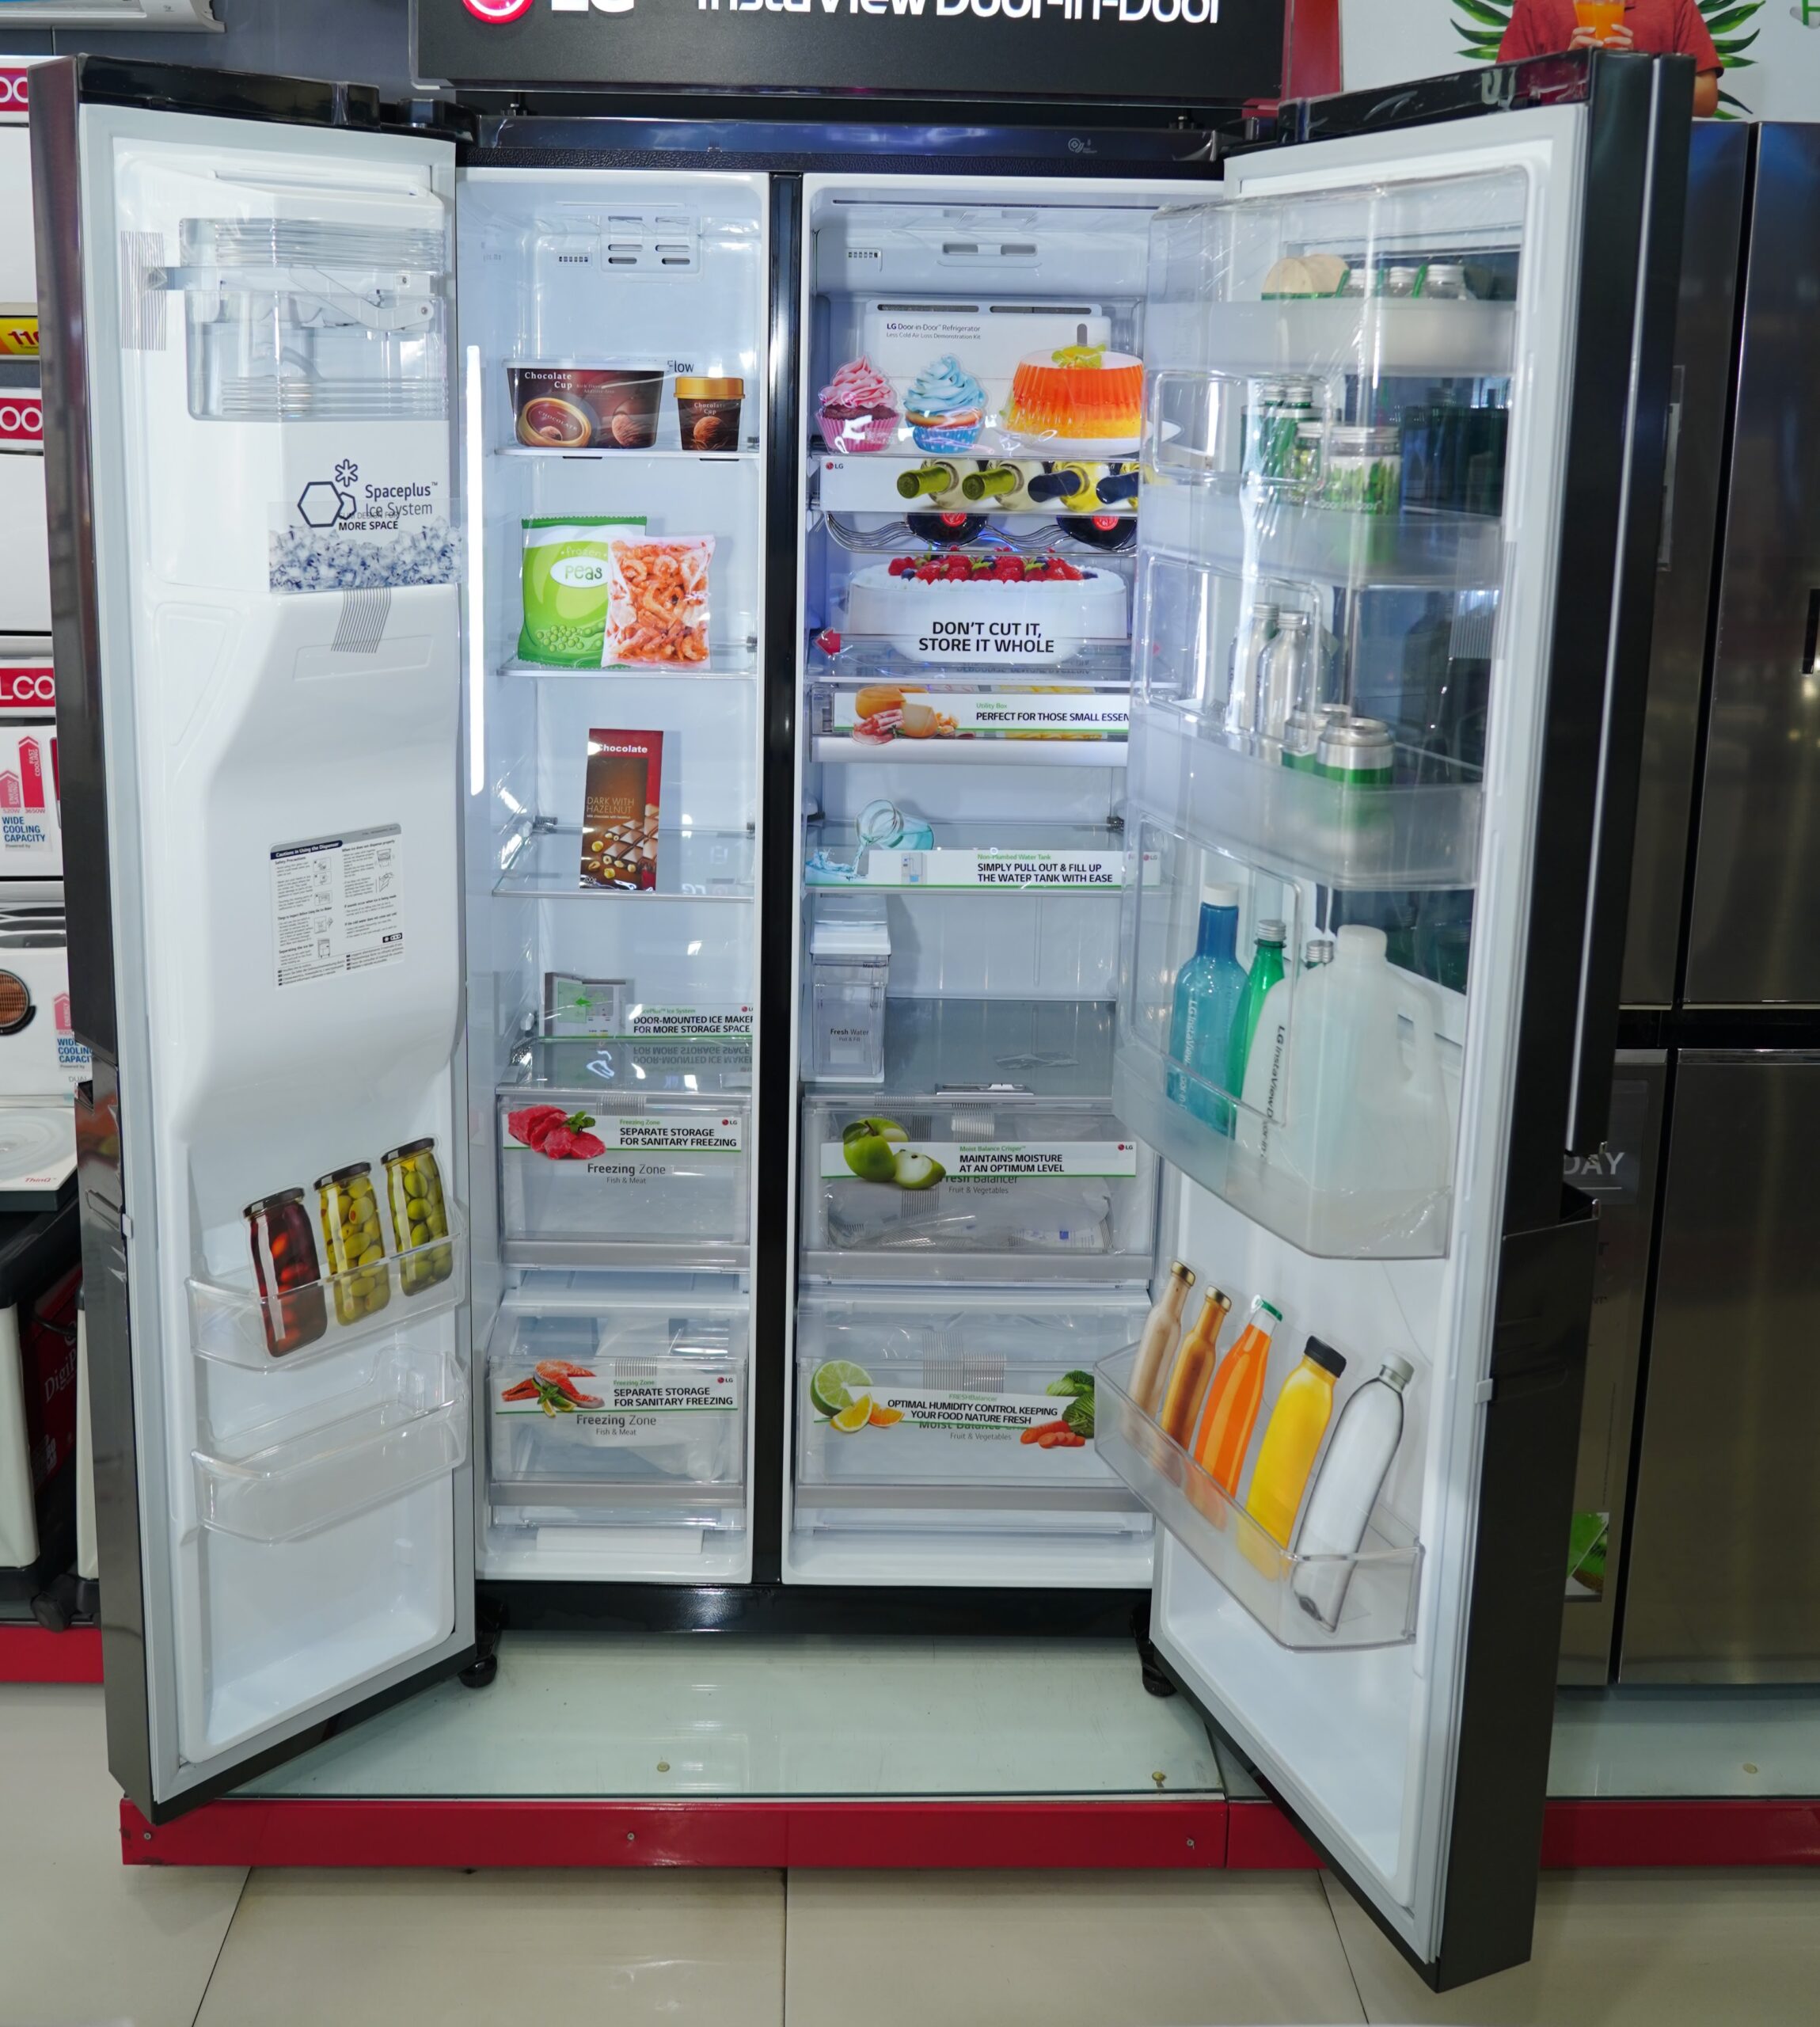 Interior of LG 688 L Frost Free Smart Inverter Side-by-Side Refrigerator: spacious shelves and LED lighting